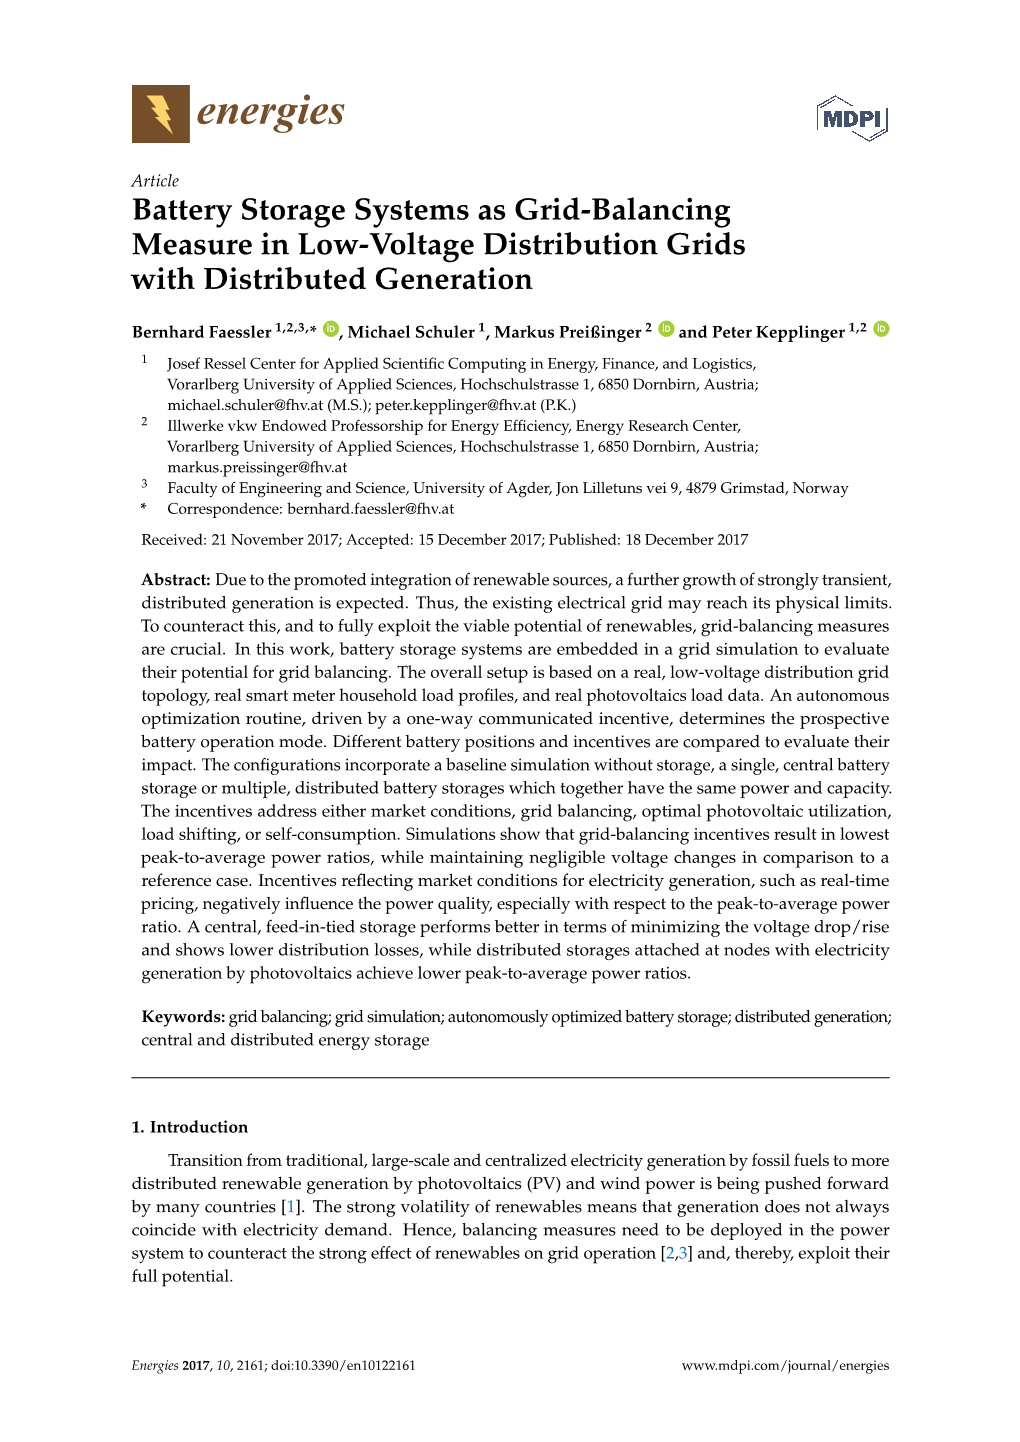 Battery Storage Systems As Grid-Balancing Measure in Low-Voltage Distribution Grids with Distributed Generation